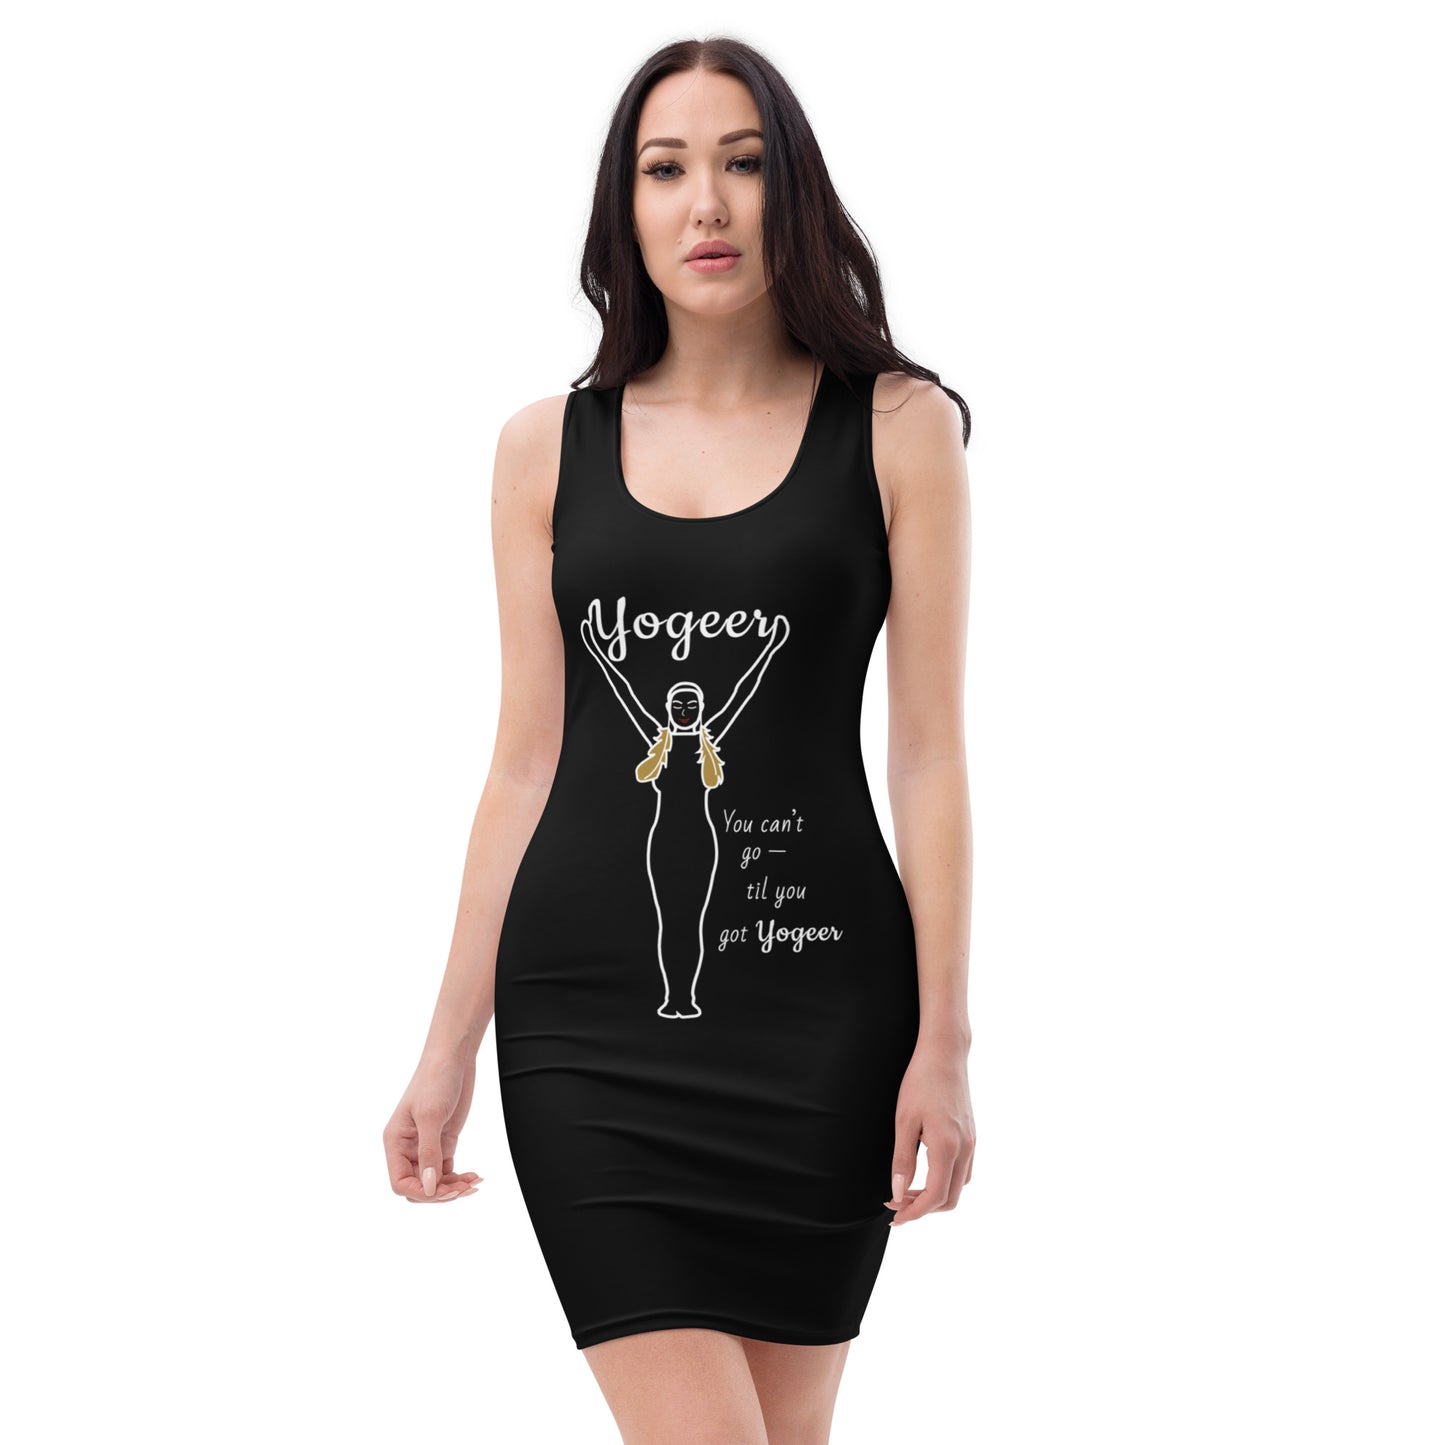 YourGeer Signature Bodycon